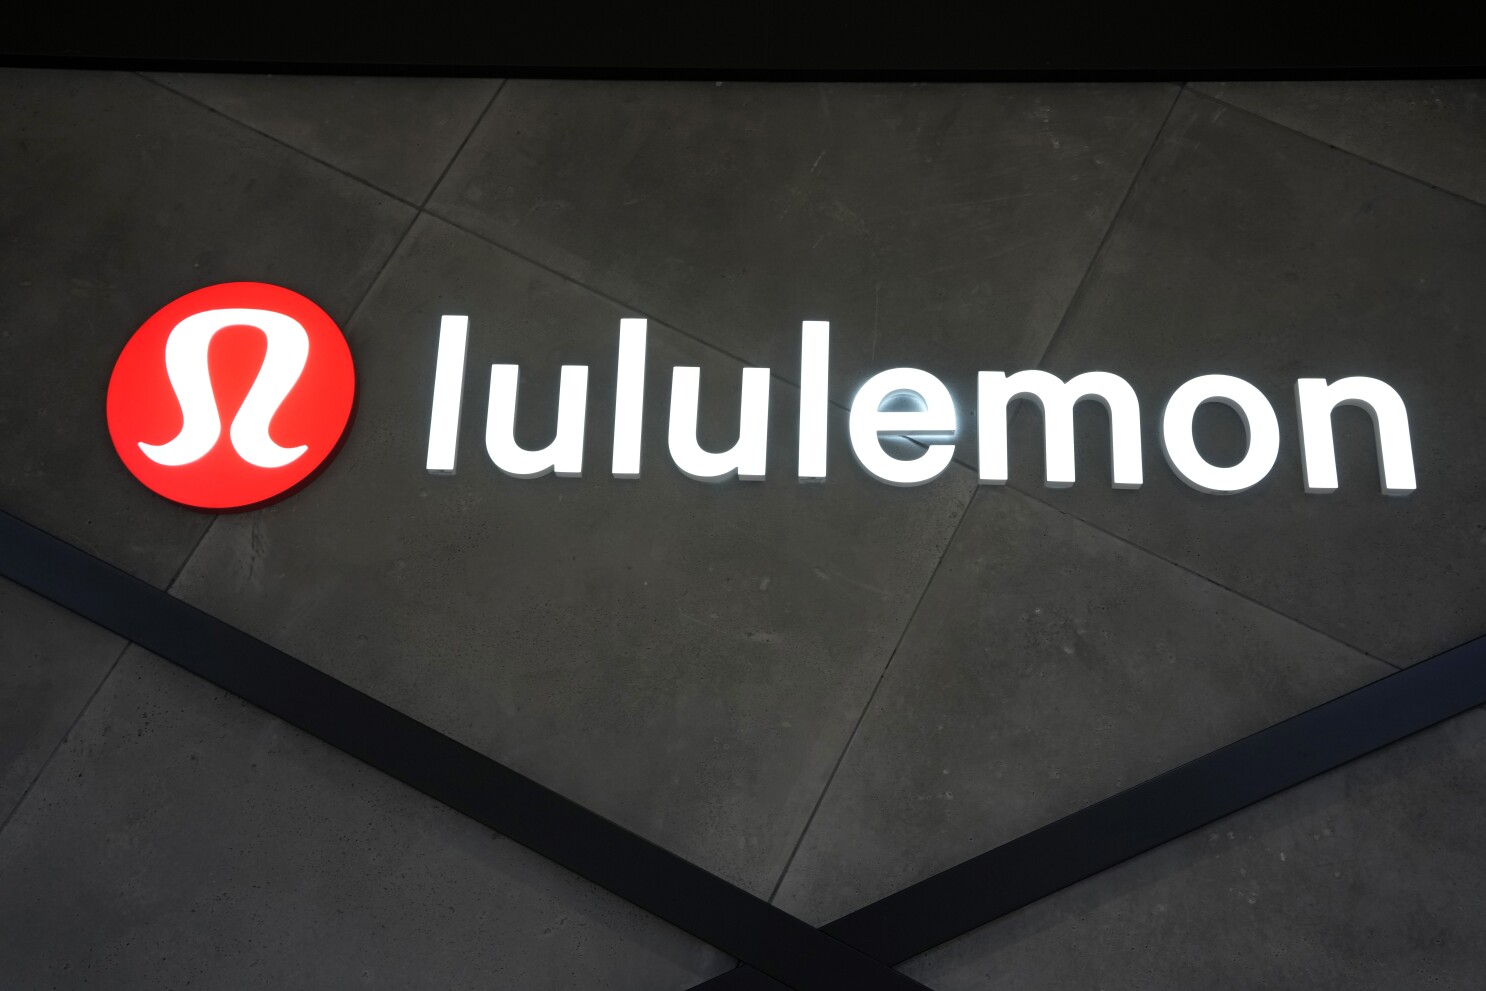 Once rivals, now partners: Peloton and Lululemon to collaborate on